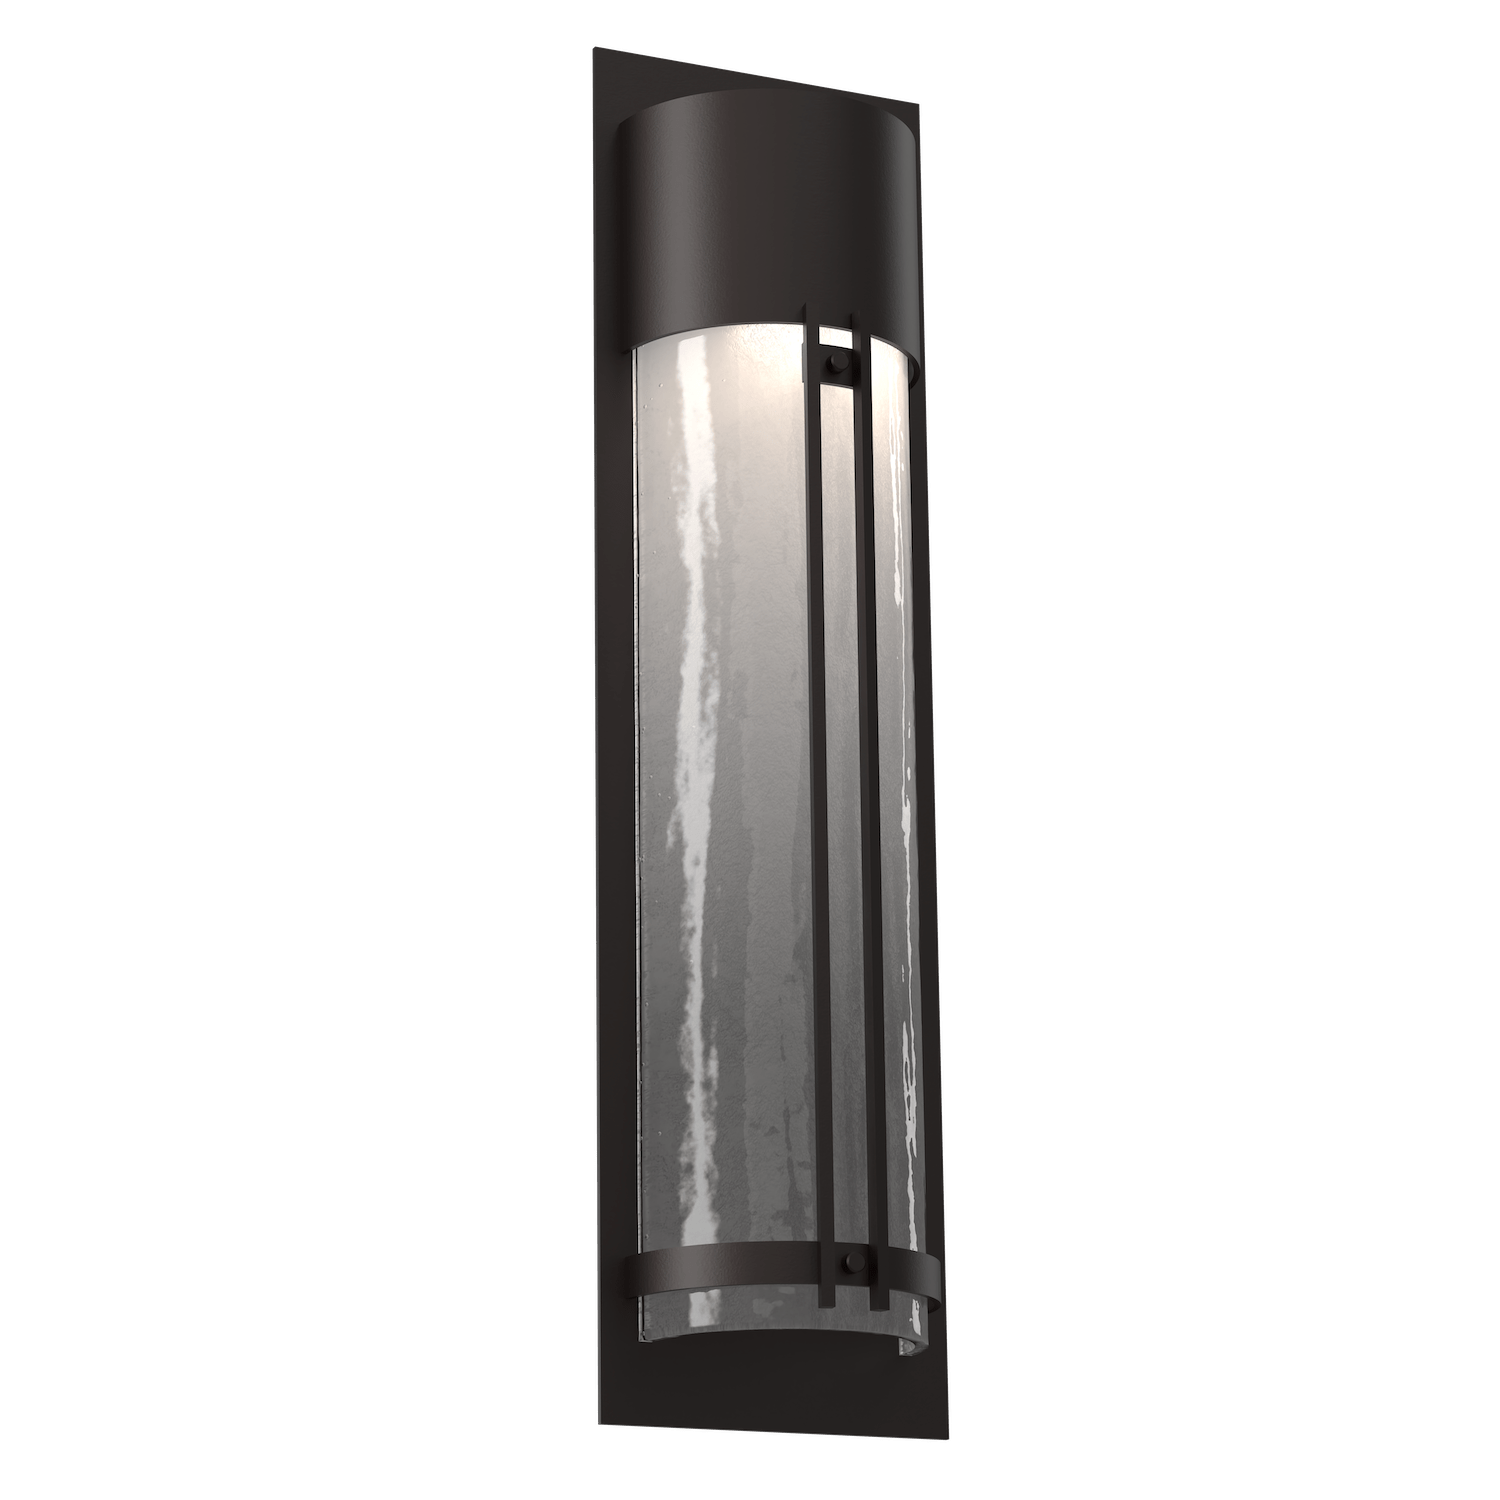 ODB0054-26-SB-FG-Hammerton-Studio-26-inch-outdoor-sconce-with-half-round-frosted-granite-glass-cover-with-statuary-bronze-finish-and-LED-lamping